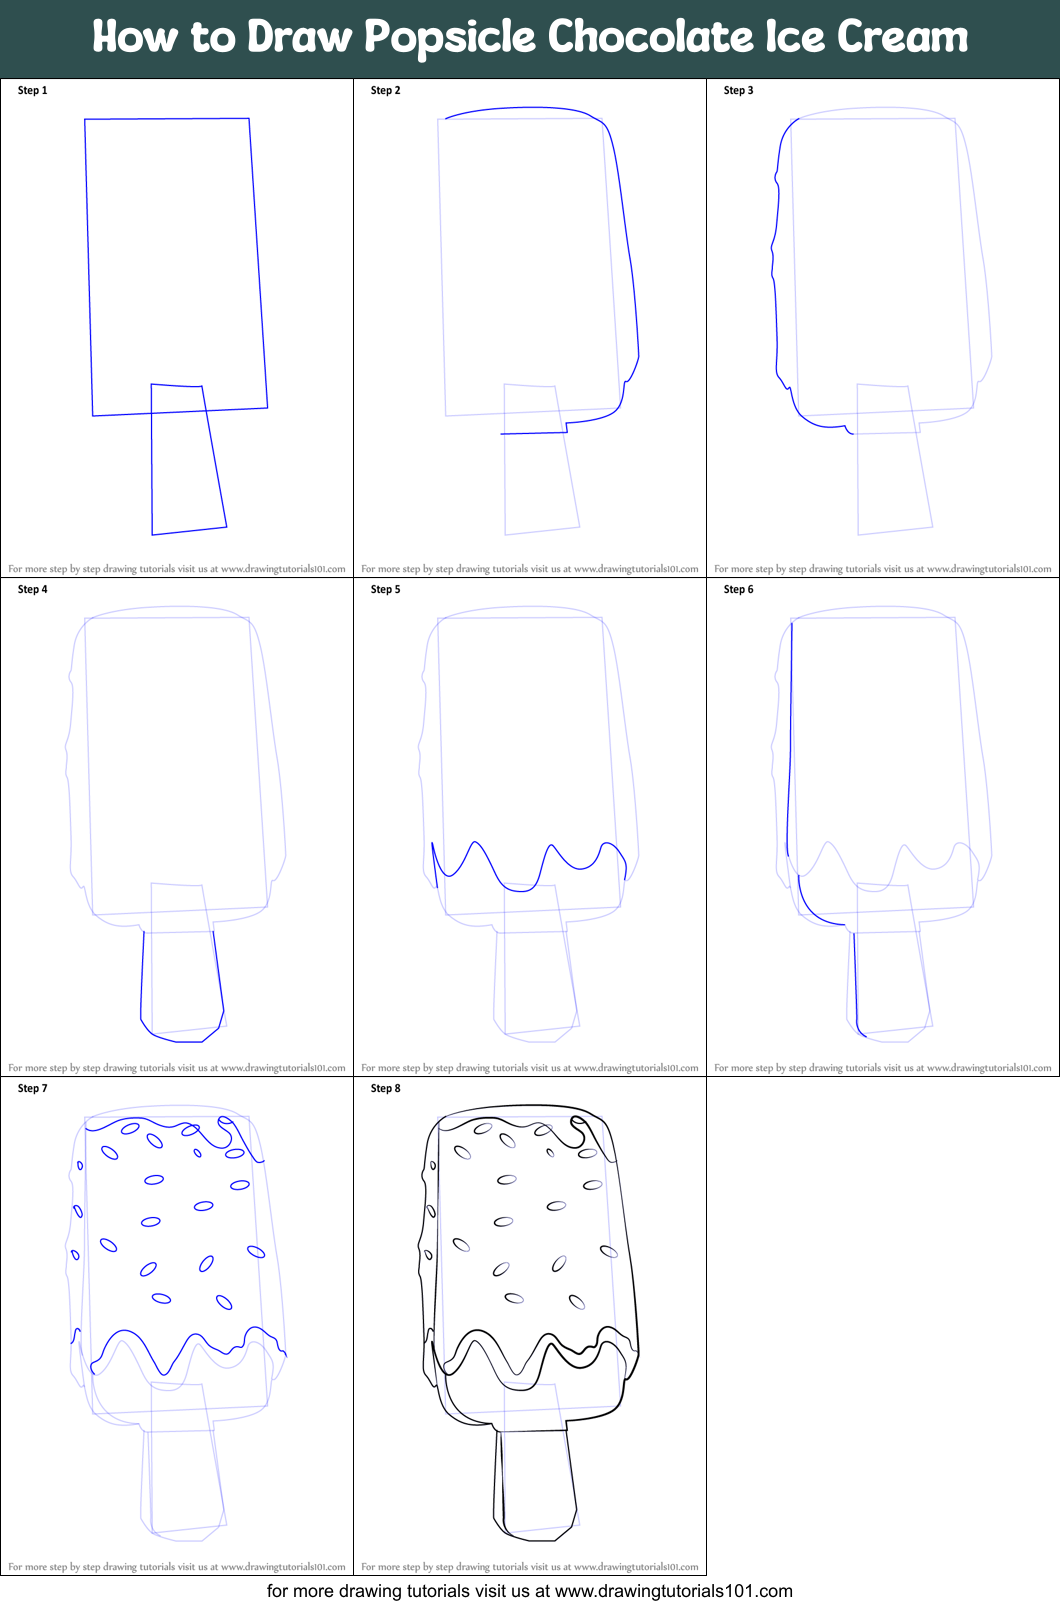 How To Draw Popsicle Chocolate Ice Cream Printable Step By Step Drawing Sheet